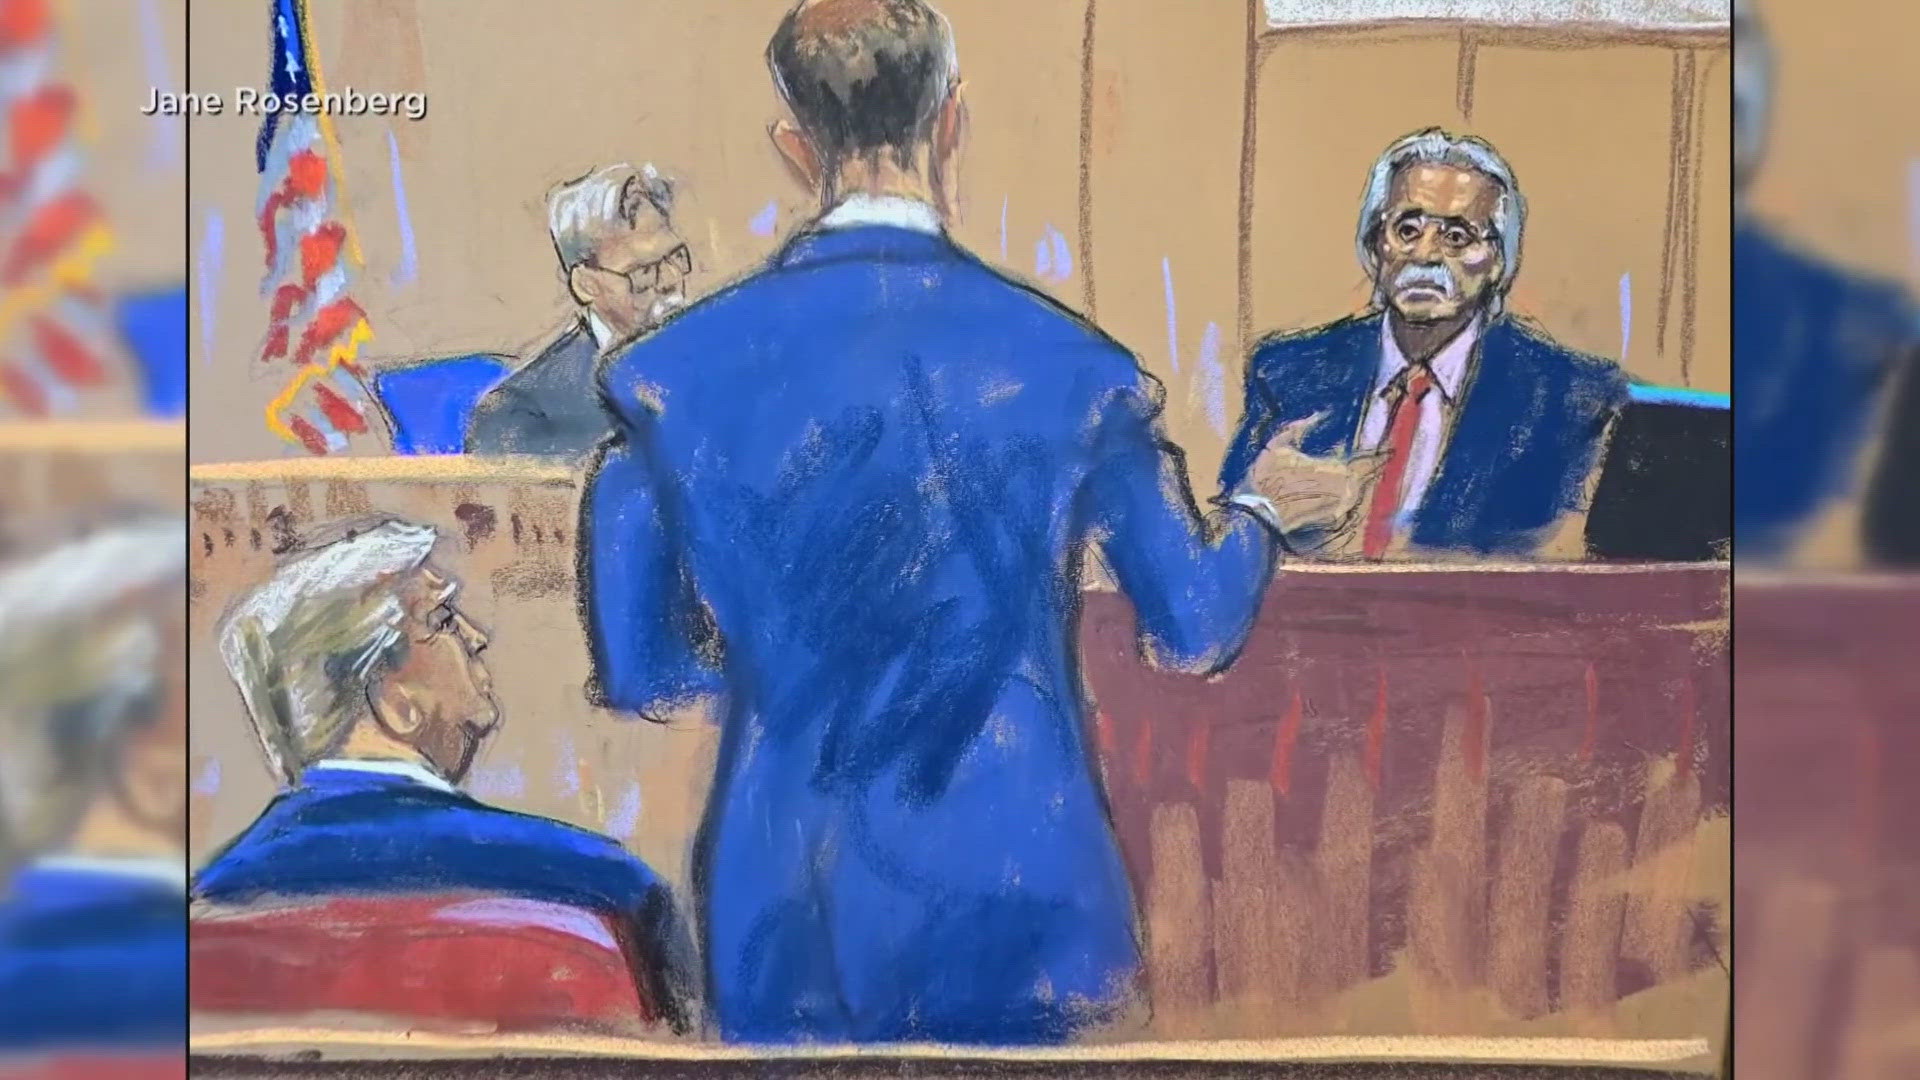 David Pecker ended his week where he began it: on the stand in former President Donald Trump's New York criminal trial.